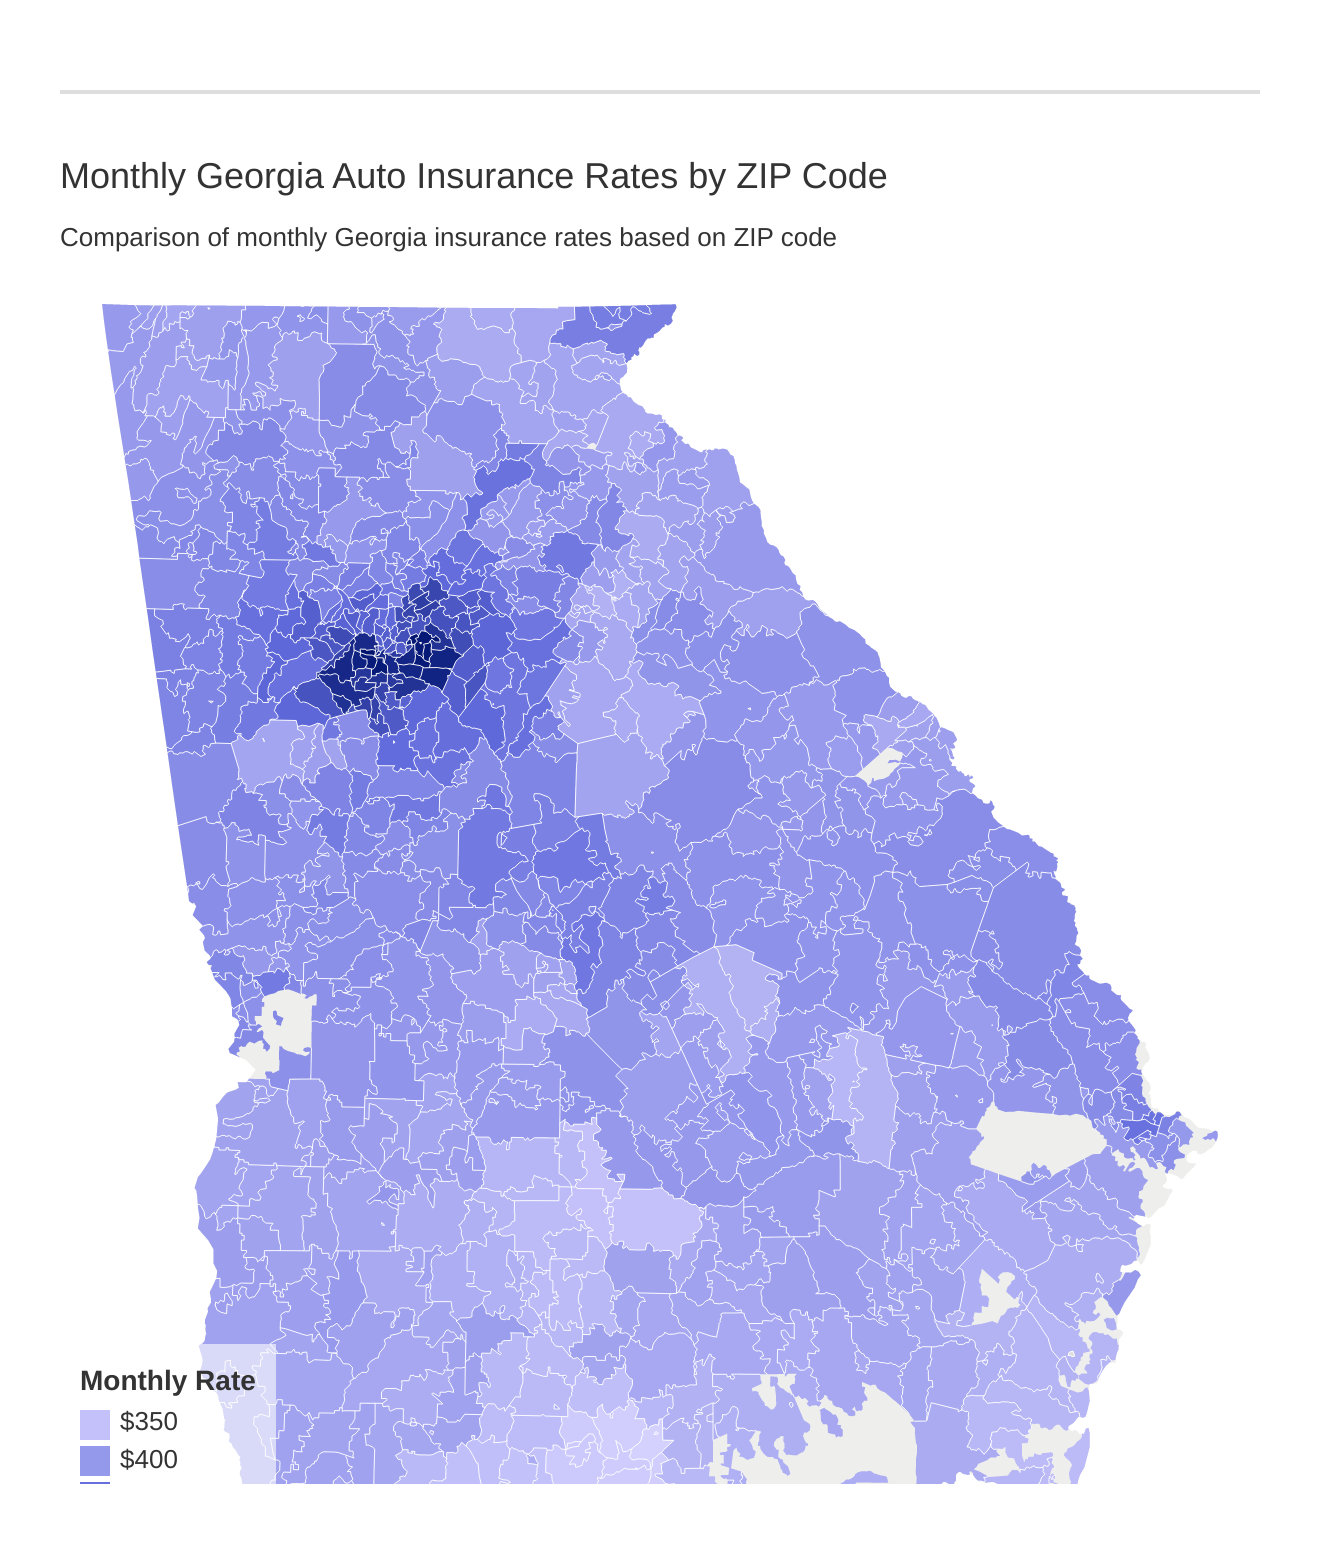 Monthly Georgia Auto Insurance Rates by ZIP Code